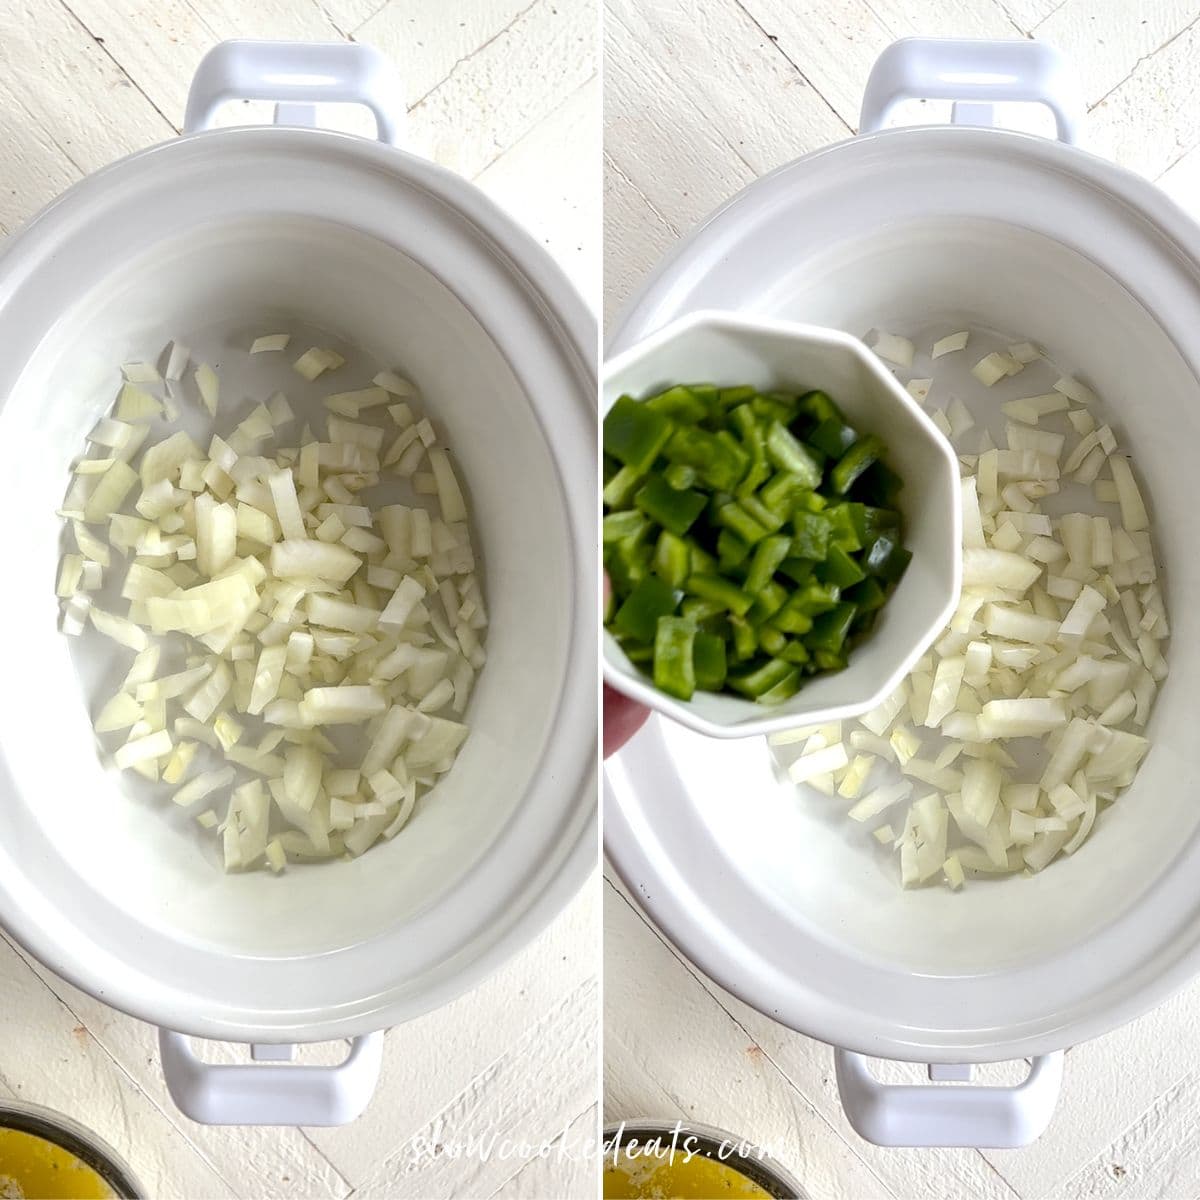 Adding onion and then green bell pepper to a small white oval crock pot.